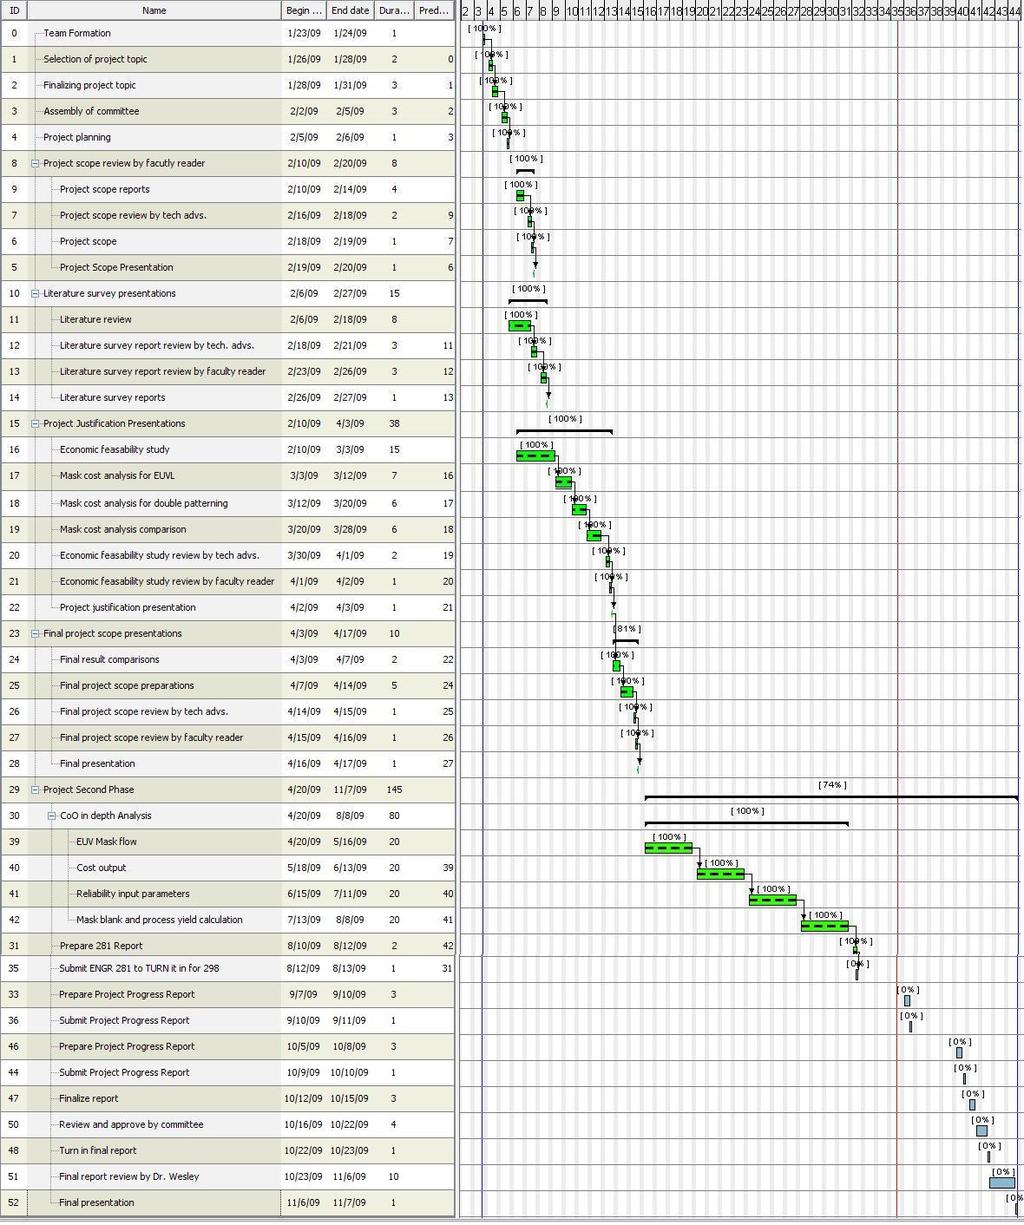 Figure 9. Milestones chart for the project. Figure 9 is the milestones chart showing the progress of the project base on the Gantt chart.